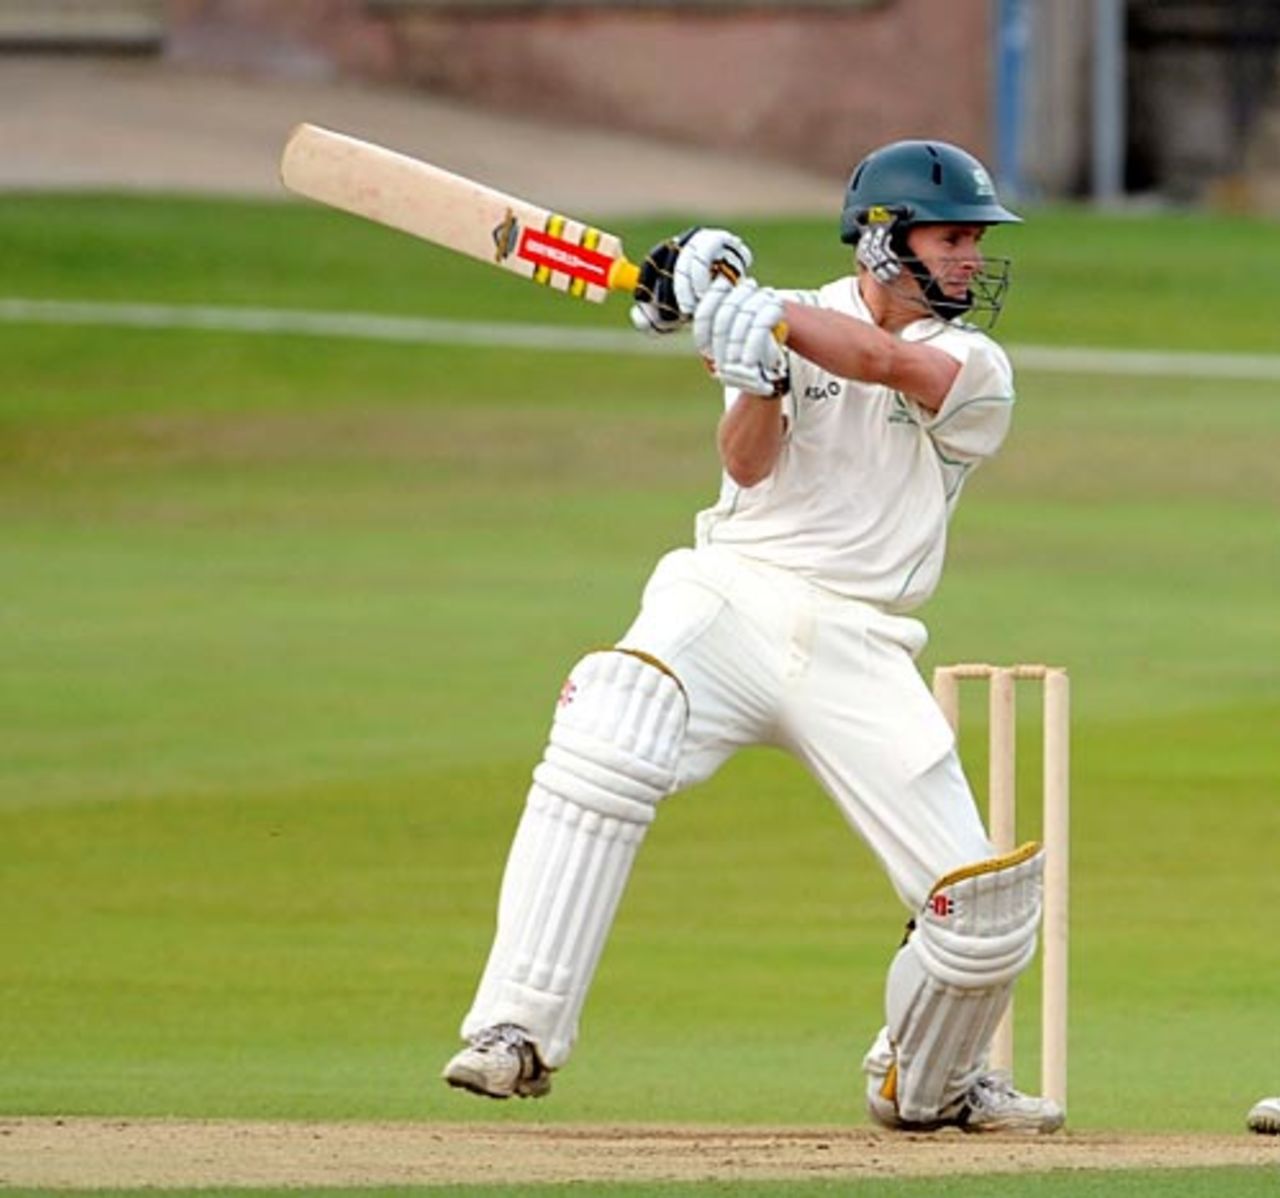 William Porterfield cuts during his hundred, Scotland v Ireland, ICC Intercontinental Cup, 3rd day, Aberdeen, August 19, 2009